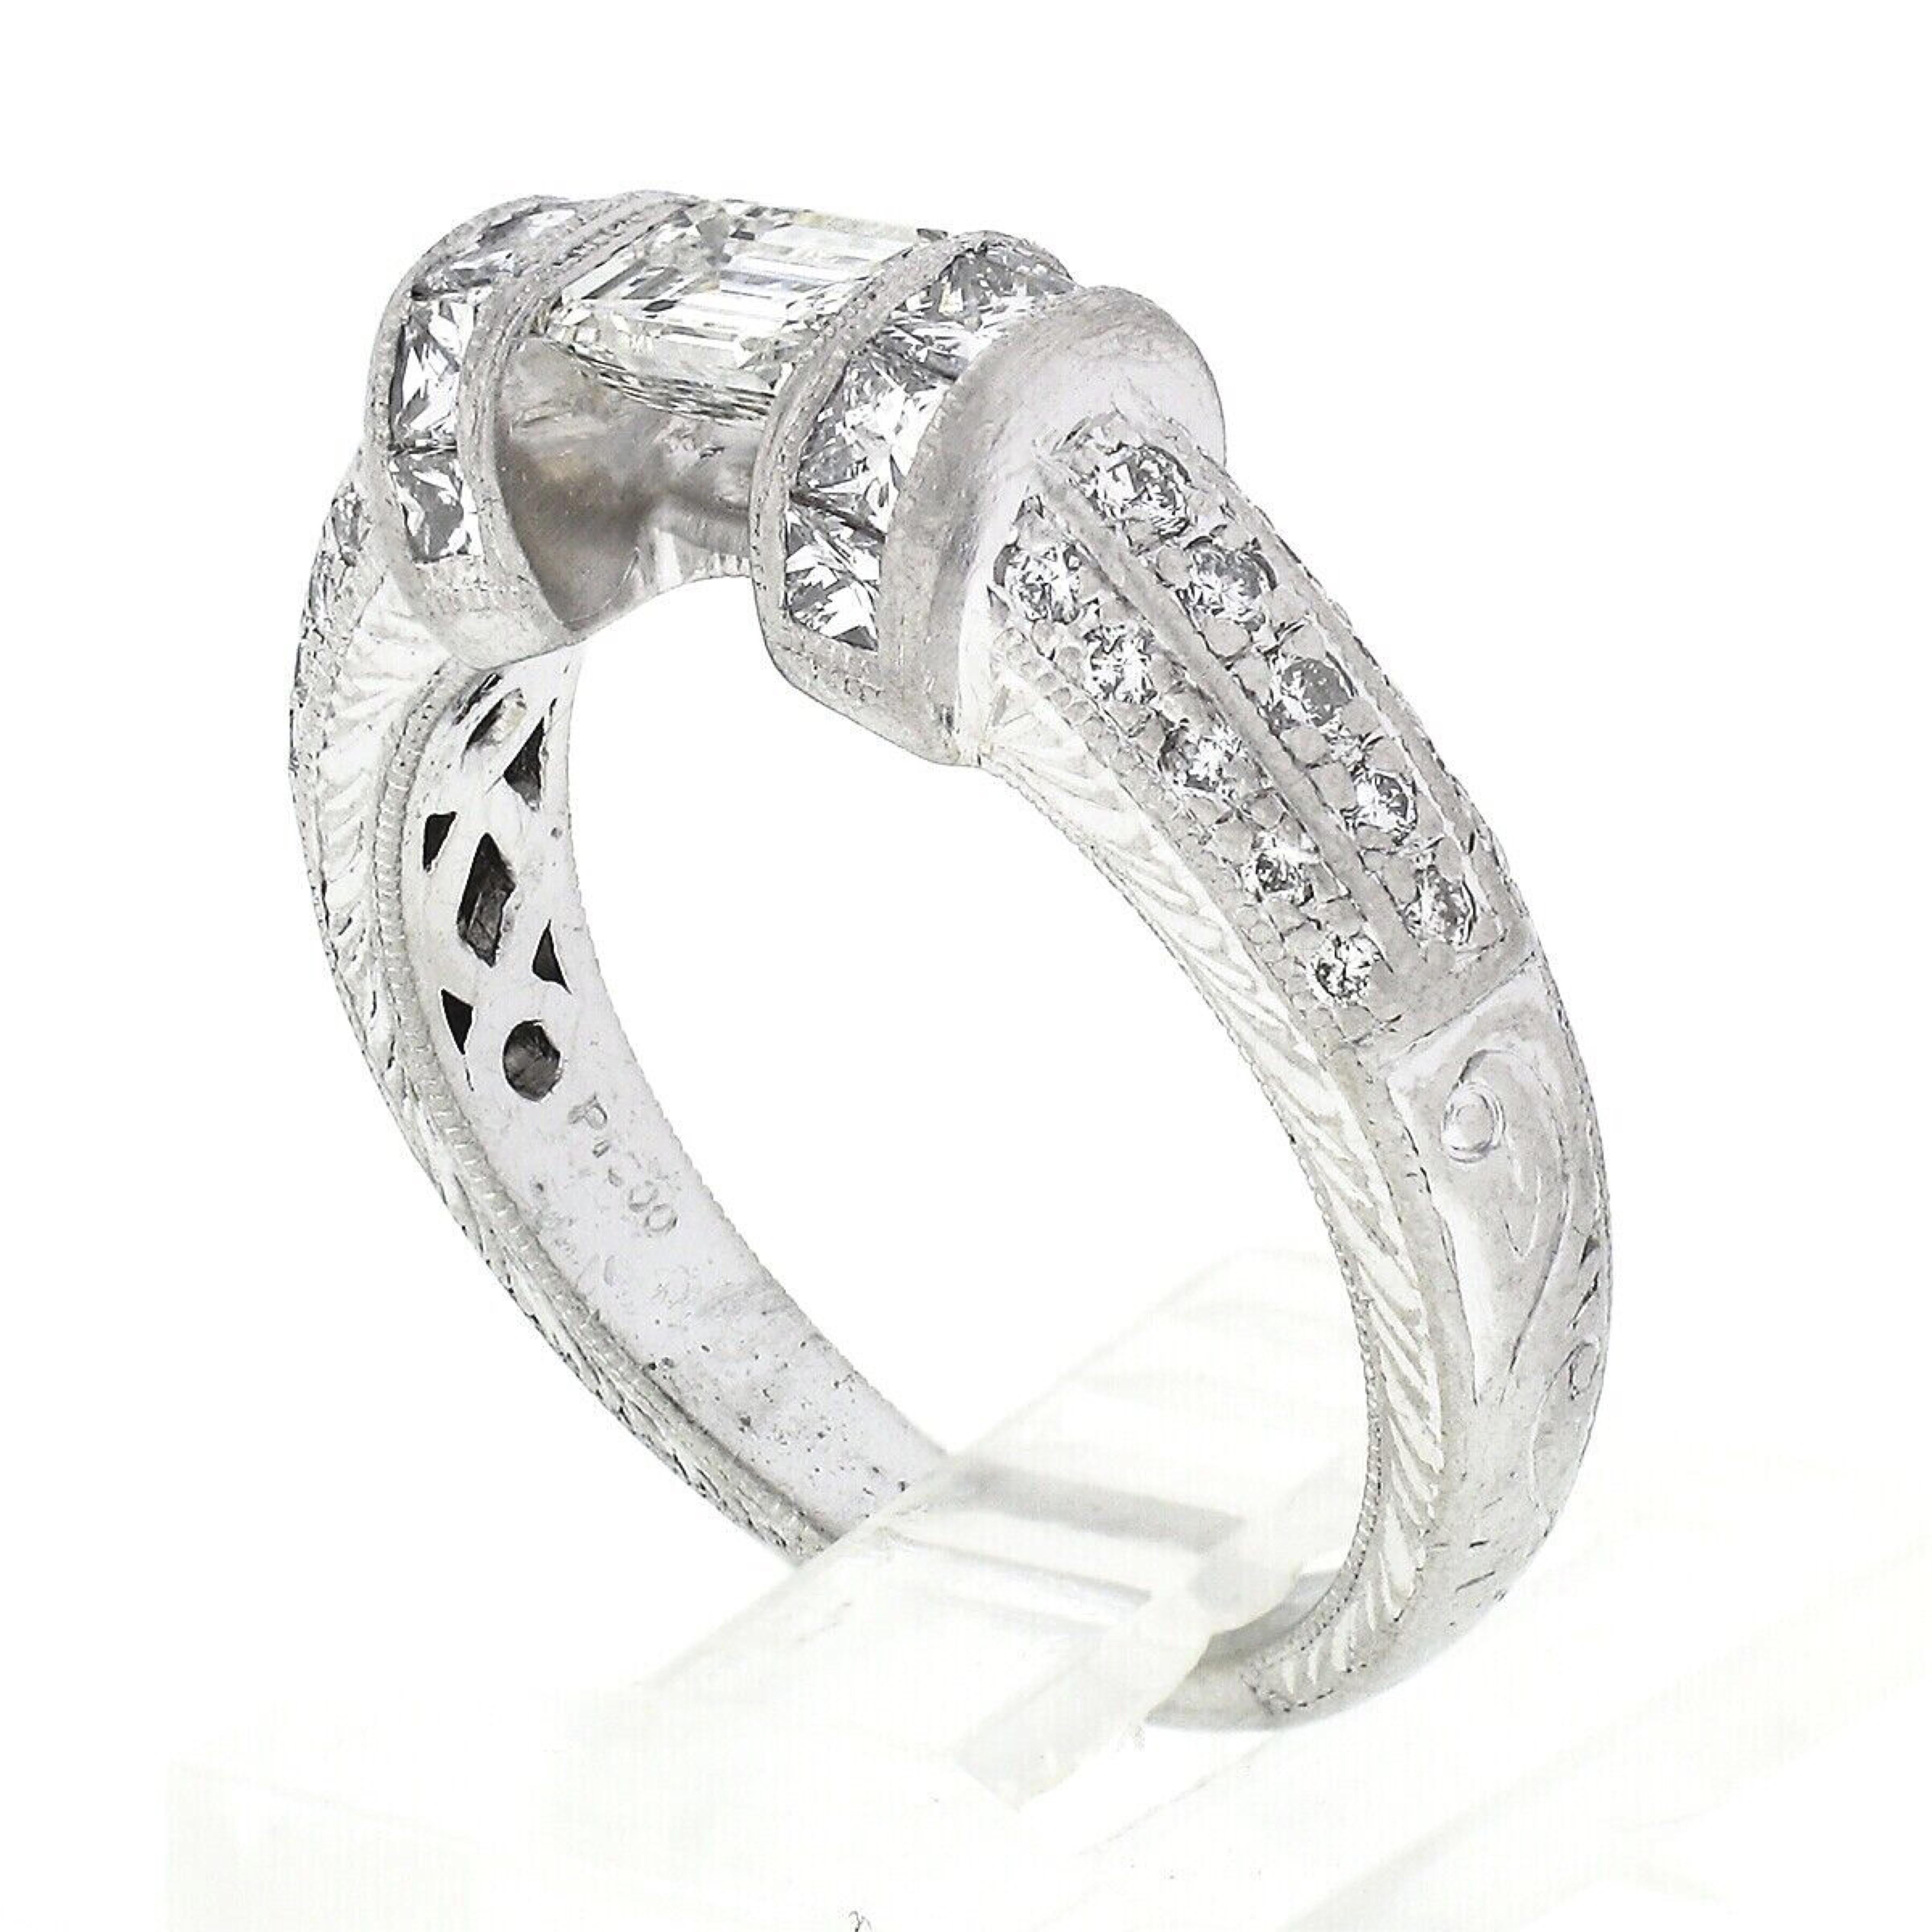 Vintage Platinum 1.35ct Floating Diamond W/ Accents Hand Engraved Work Band Ring For Sale 4